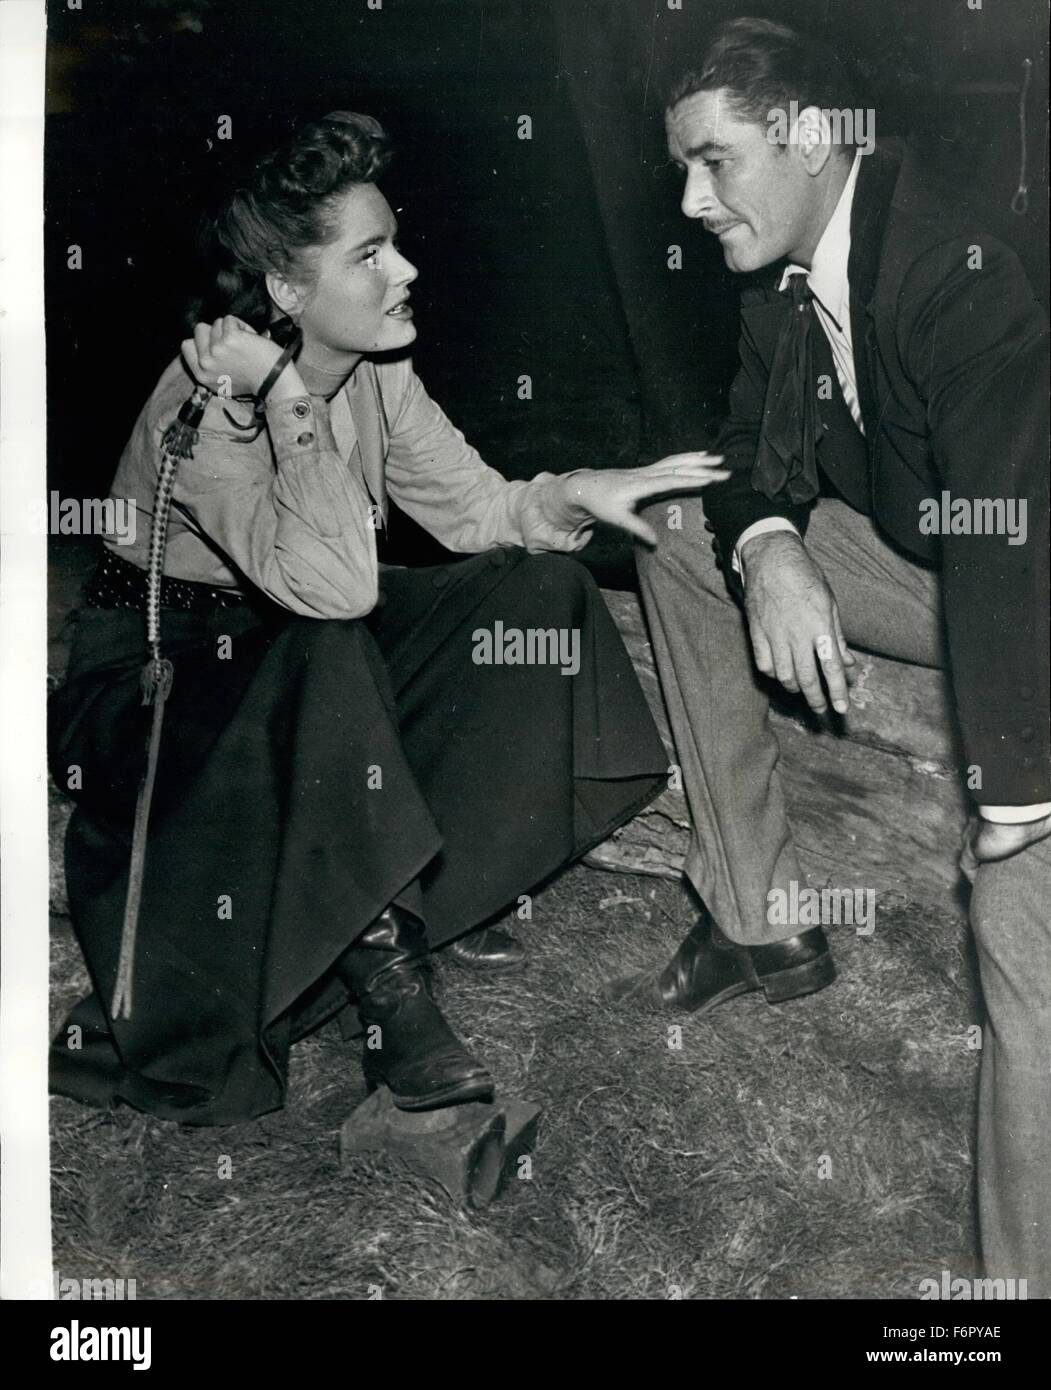 1944 - Errol Flynn Discusses His Forth Coming Marries With Star Alexis Smith: Alexis Smith and Errol Flynn seen as they have a quiet chat between scenes - in their Hollywood studios. Flynn is discussing his forthcoming marriage with Roumanian Princess Ghika. He was recently divorced from Mora Eddington. © Keystone Pictures USA/ZUMAPRESS.com/Alamy Live News Stock Photo